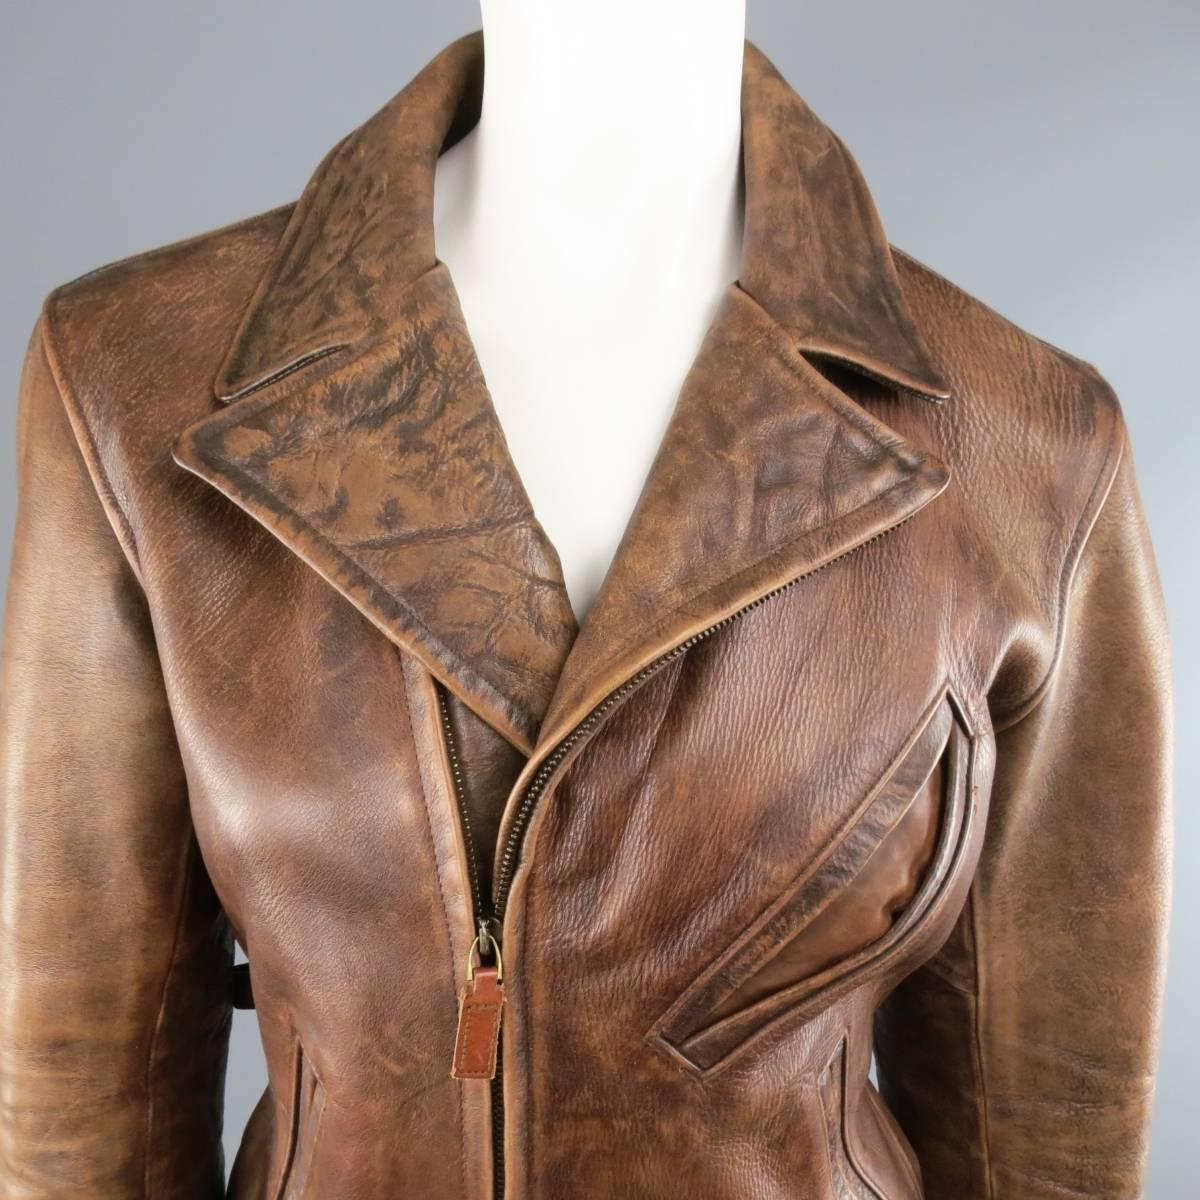 RALPH LAUREN COLLECTION biker jacket in a structured, distressed tan brown leather featuring a pointed lapel, zip closure, slanted pockets, and side tabs. Wear throughout.
 
Good Pre-Owned Condition.
No Size.
 
Measurements:
 
Shoulder: 16 in.
Bust: